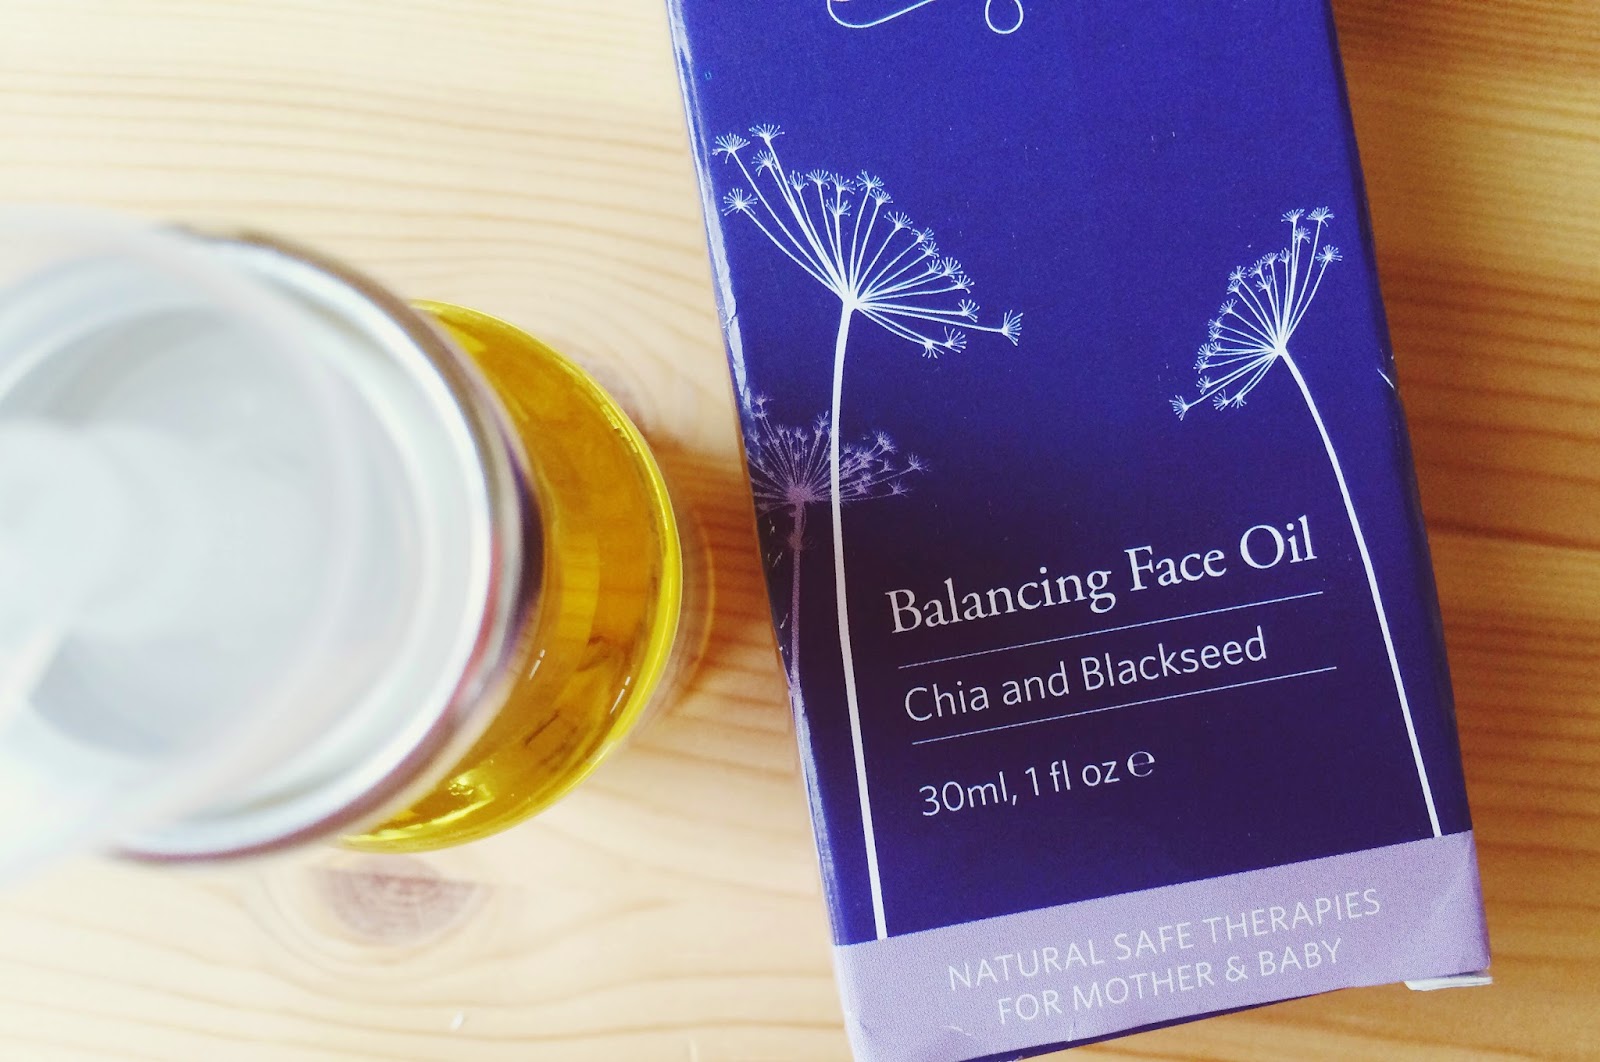 FashionFake, a UK fashion and lifestyle blog. Kadria Balancing Face Oil is a natural oil made with chia and blackseed - FashionFake reviews!